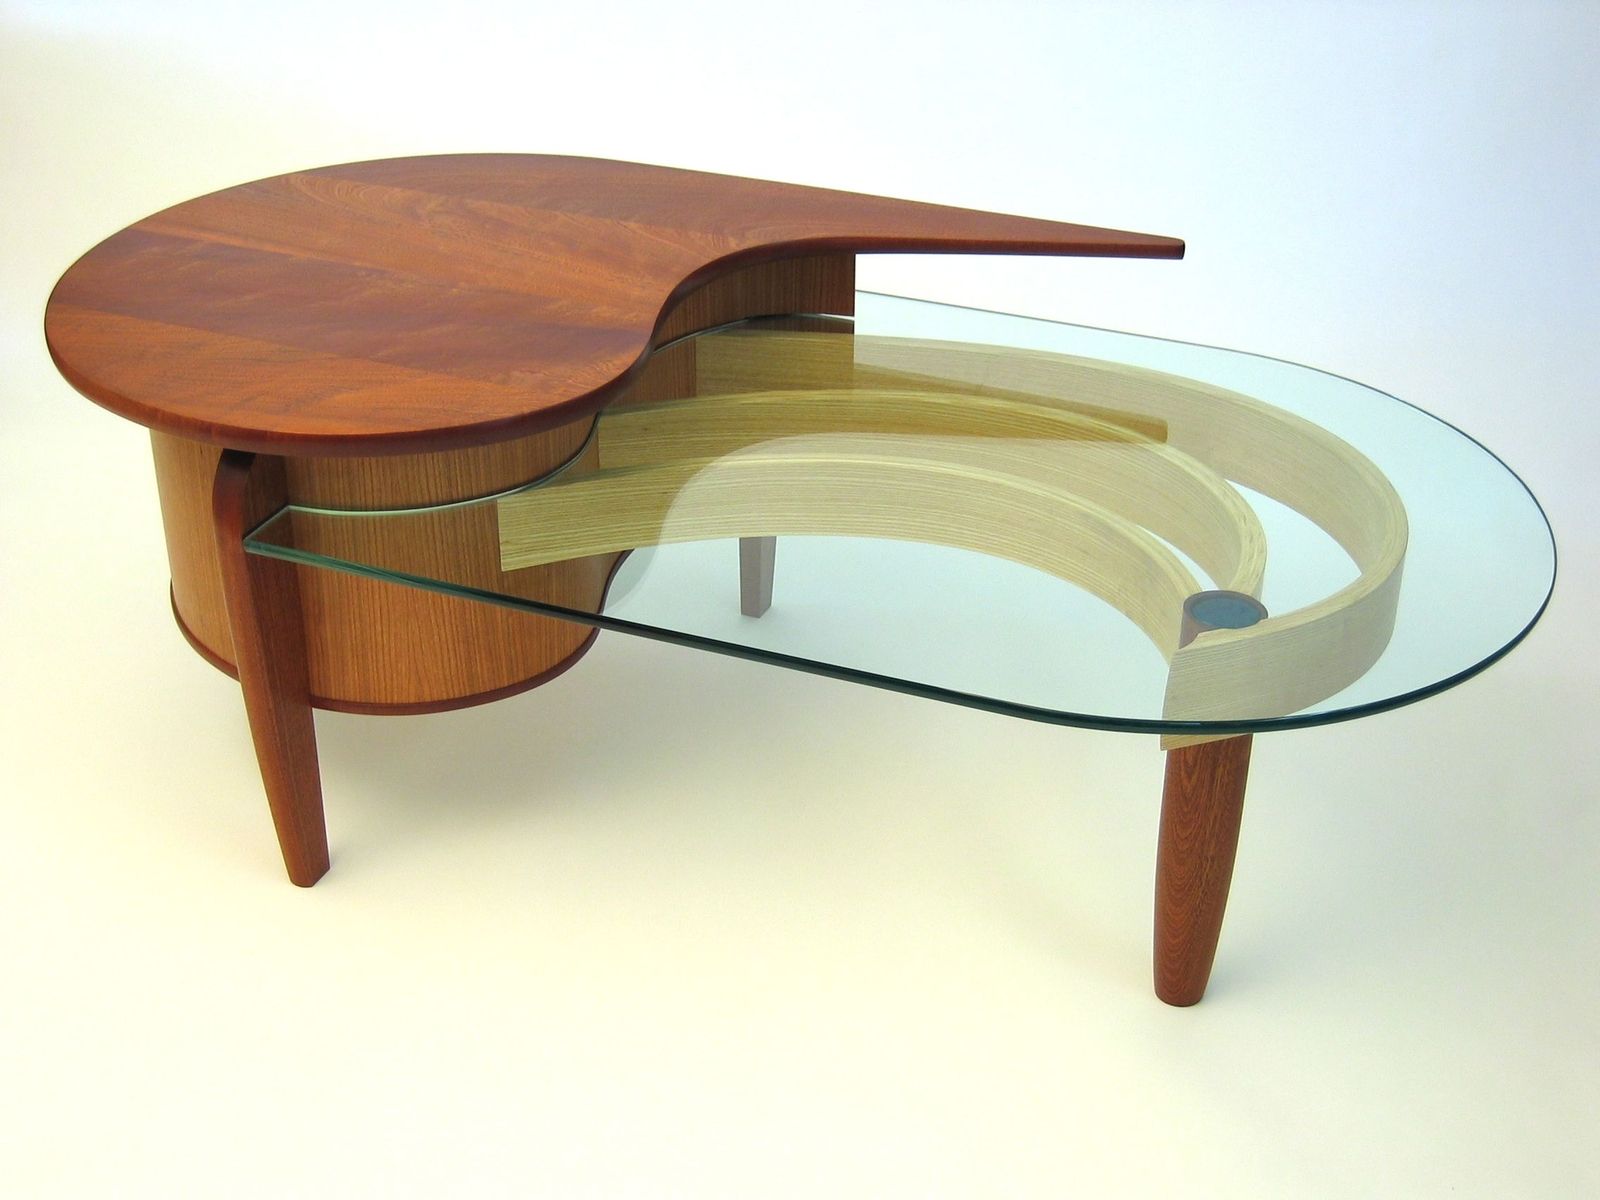 Hand Crafted Mahogany Cherry And Glass Coffee Table By Dogwood